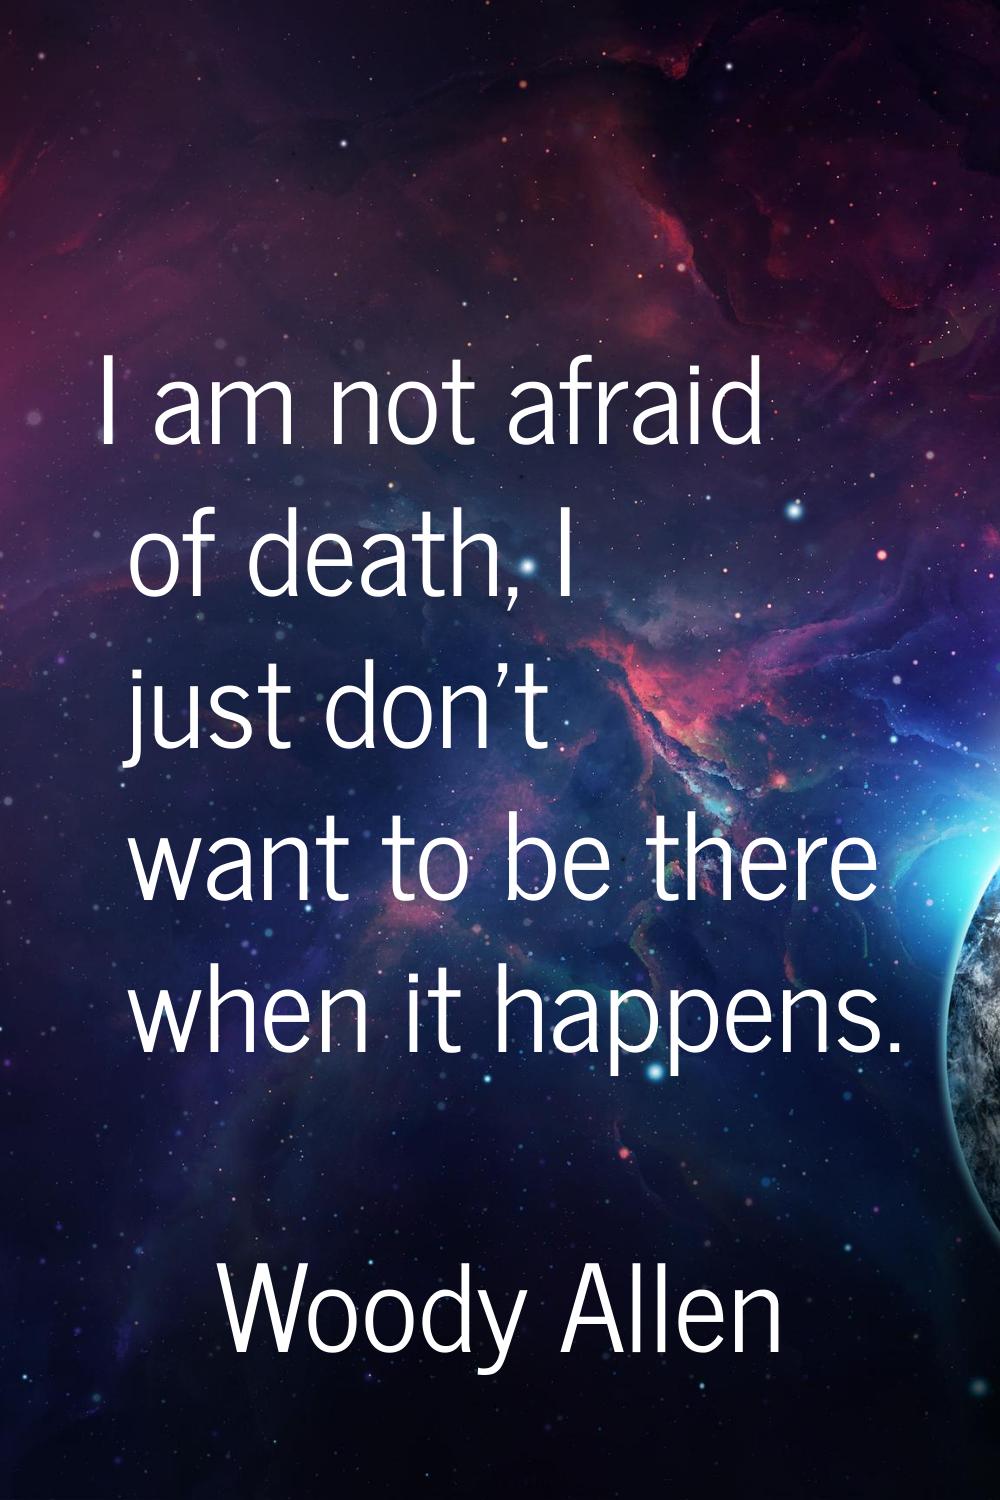 I am not afraid of death, I just don't want to be there when it happens.